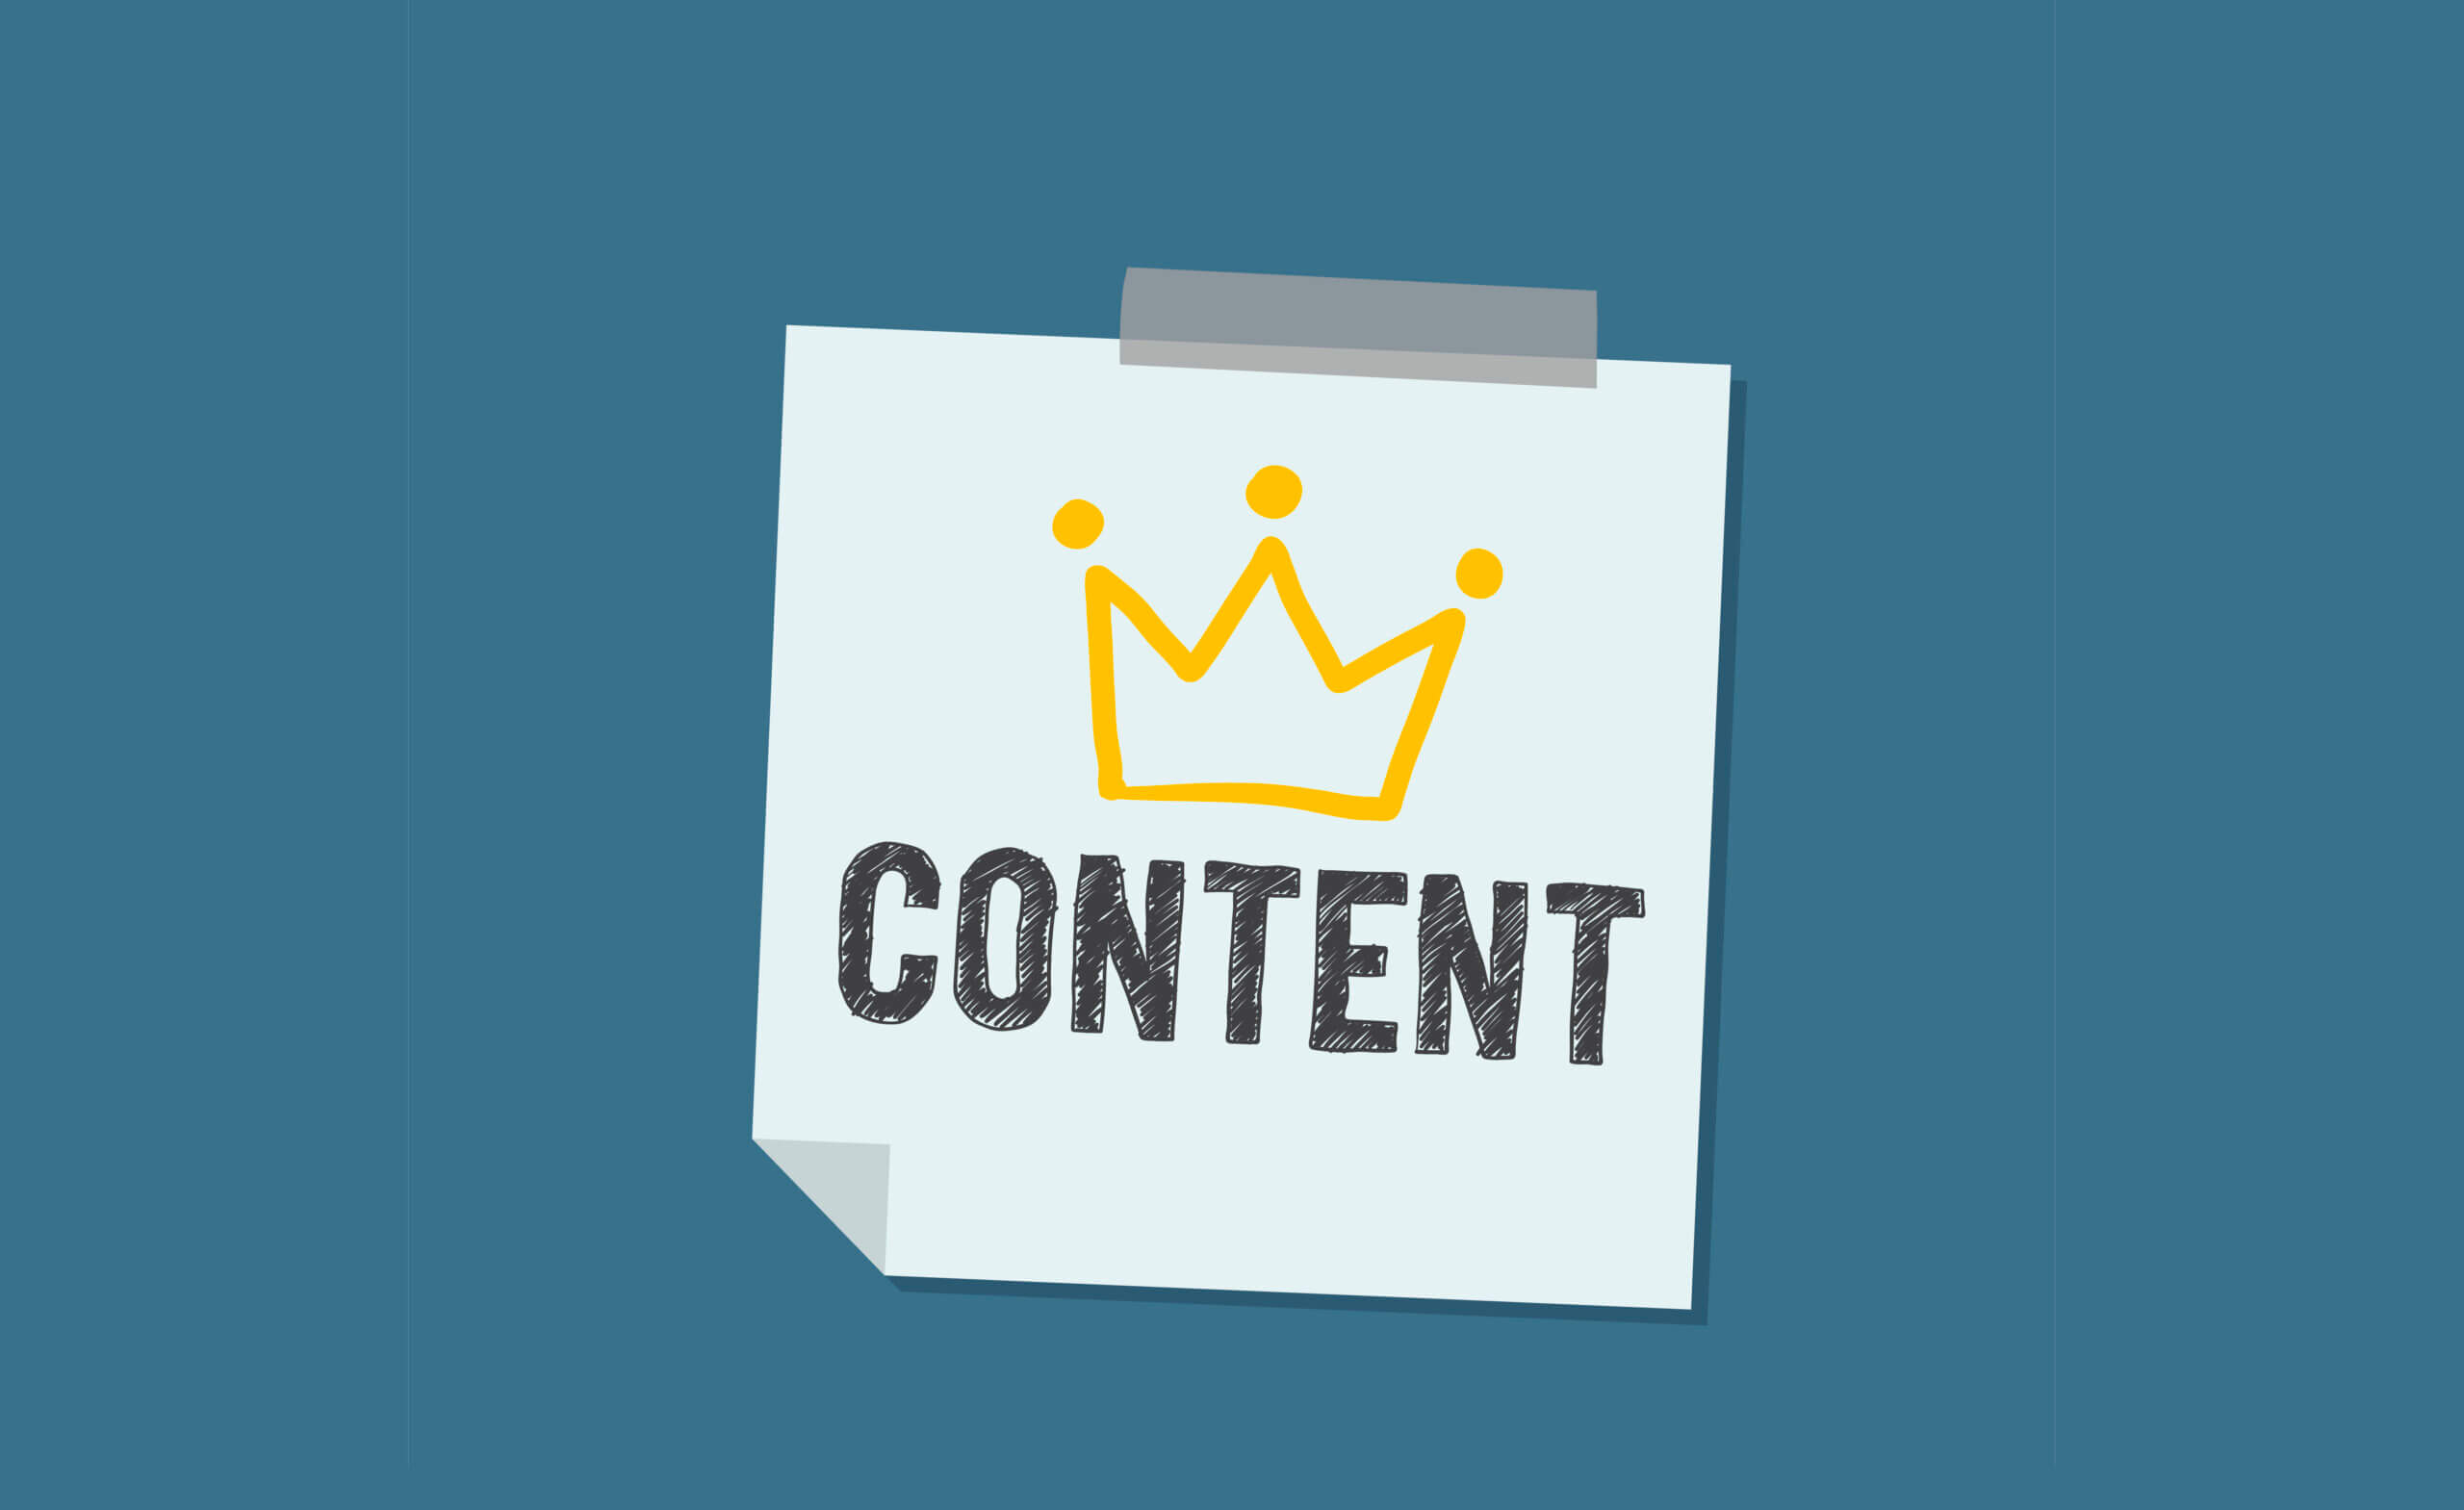 Content is the king in a teal background